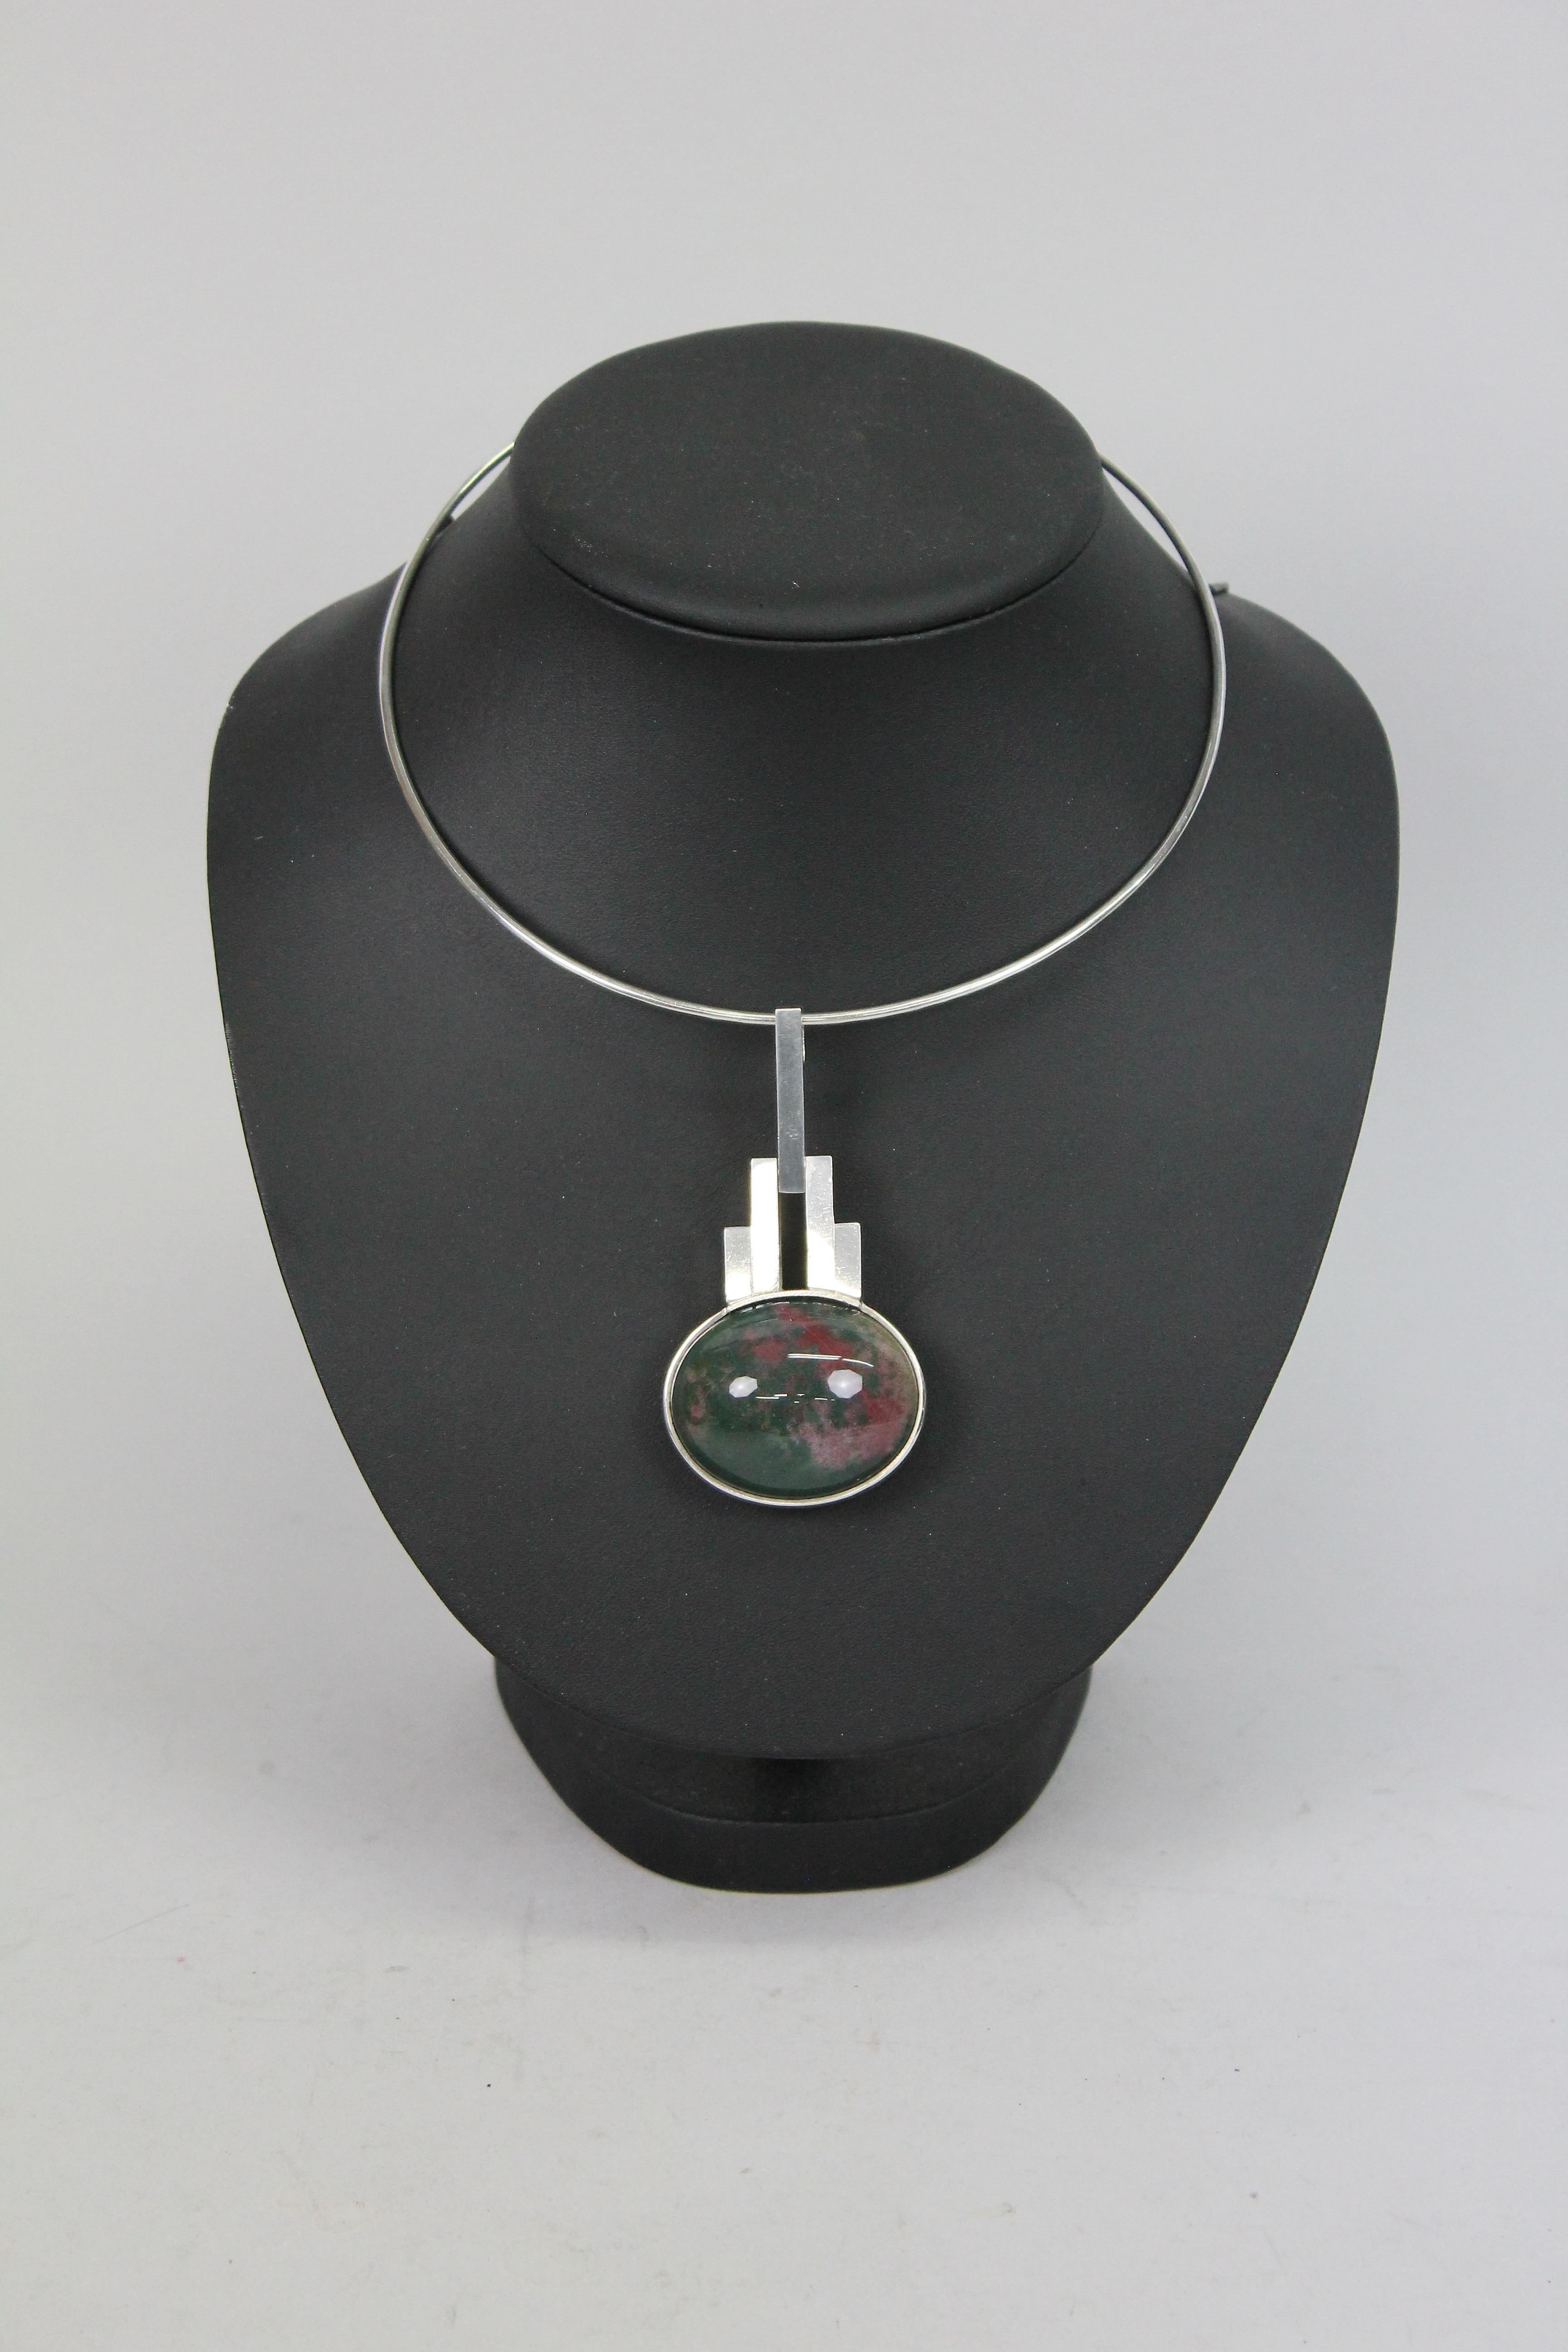 Cabochon Elon Aronhill Sweden 1967 Sterling Silver with Heliotrope / Bloodstone Pendant